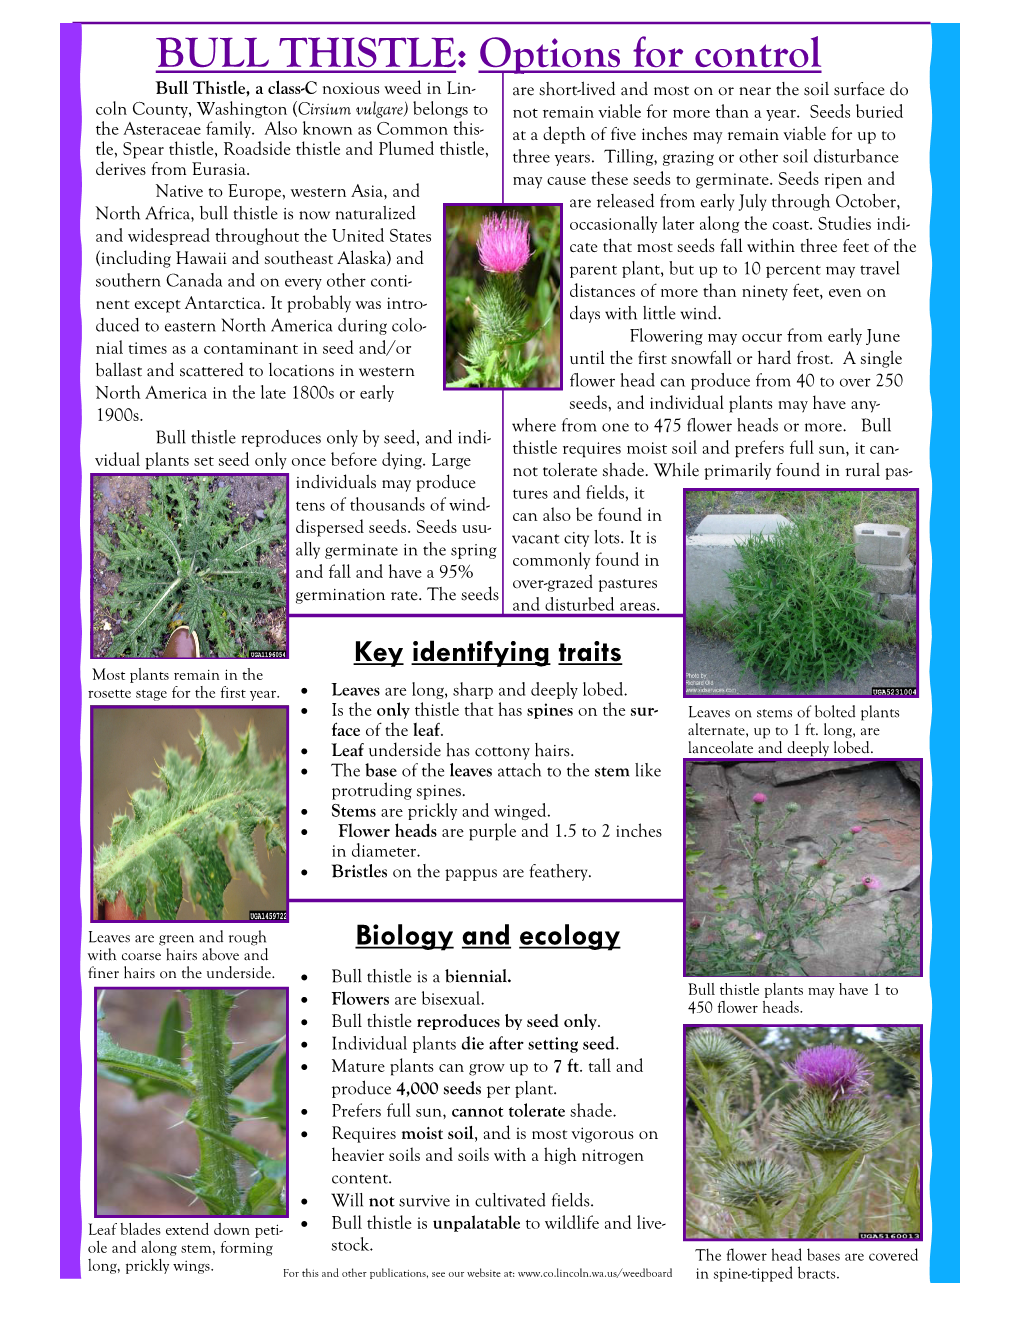 BULL THISTLE: Options for Control